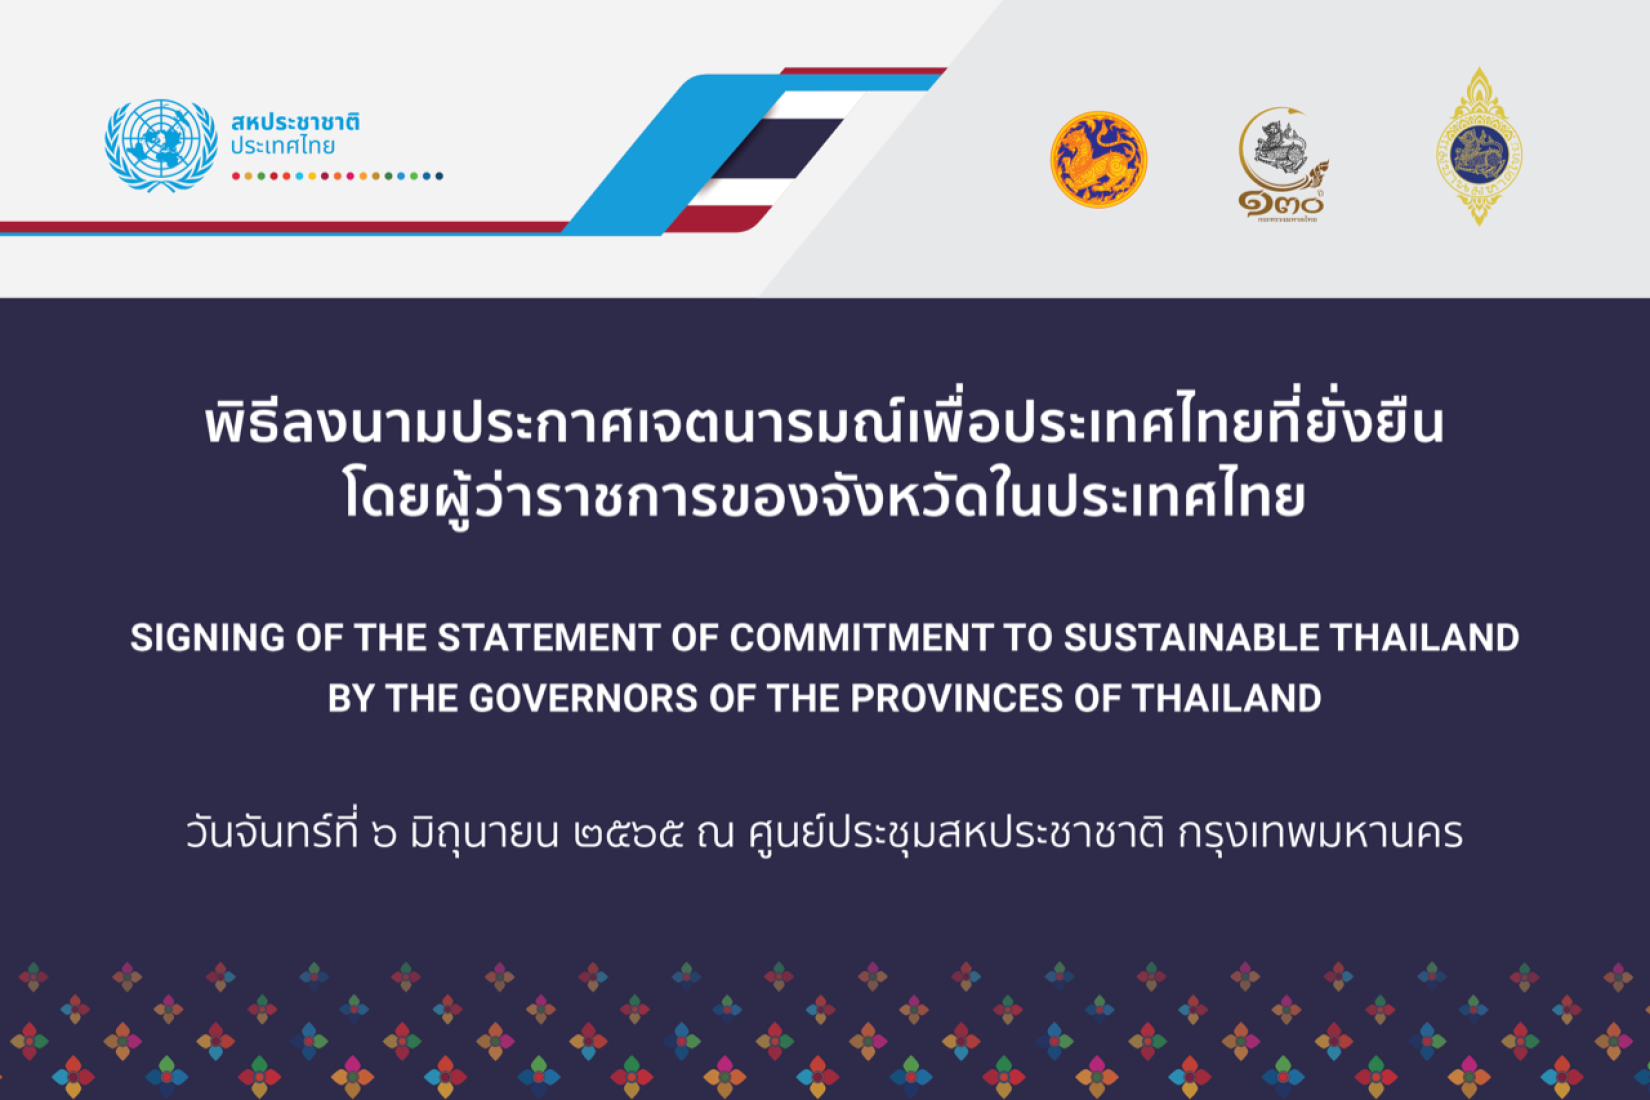 Statement of Commitment to Sustainable Thailand